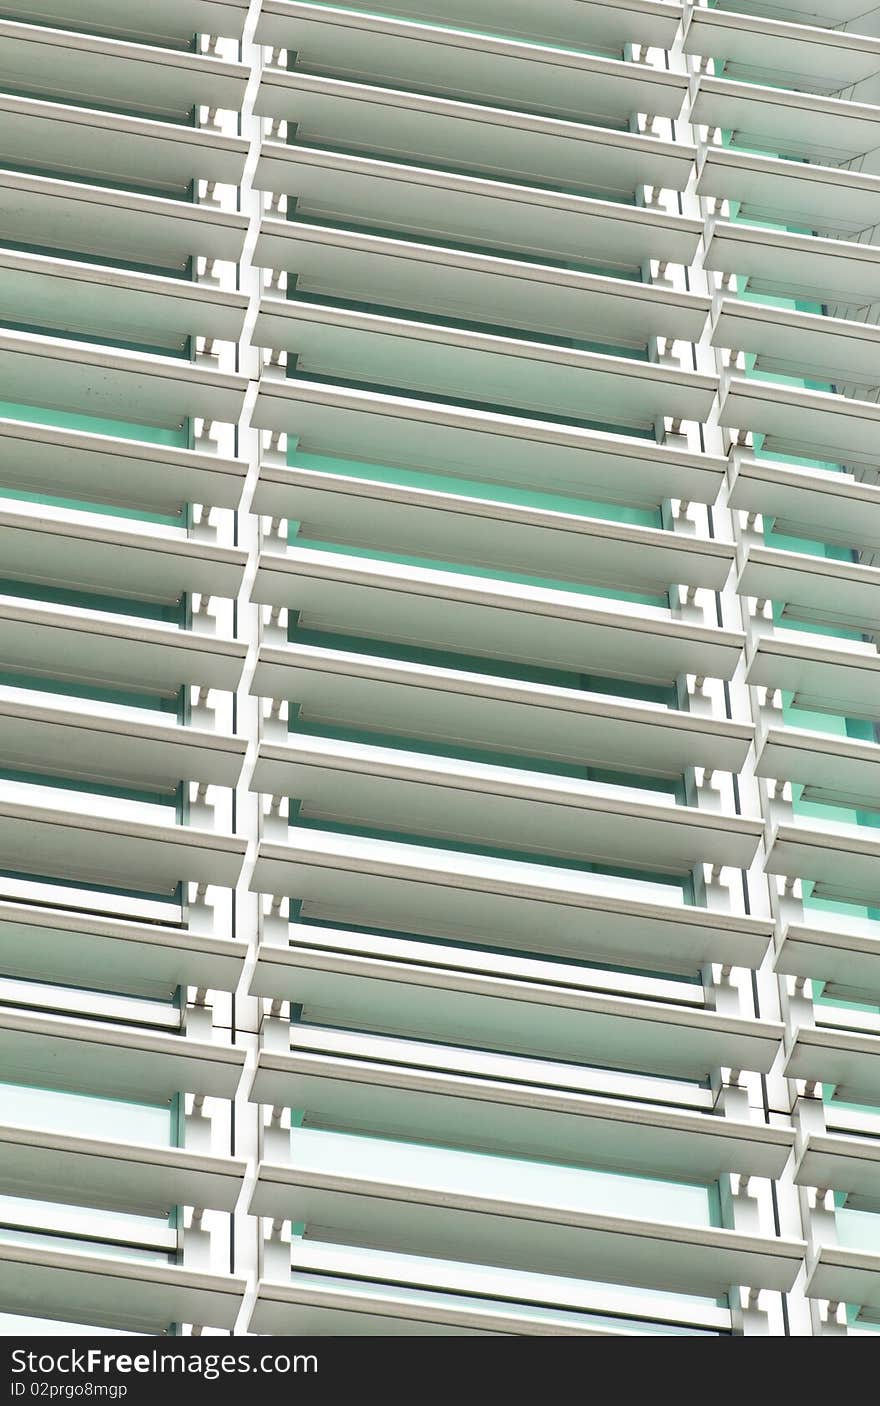 A Portrait of Office Window with Its Permanent Blind. A Portrait of Office Window with Its Permanent Blind